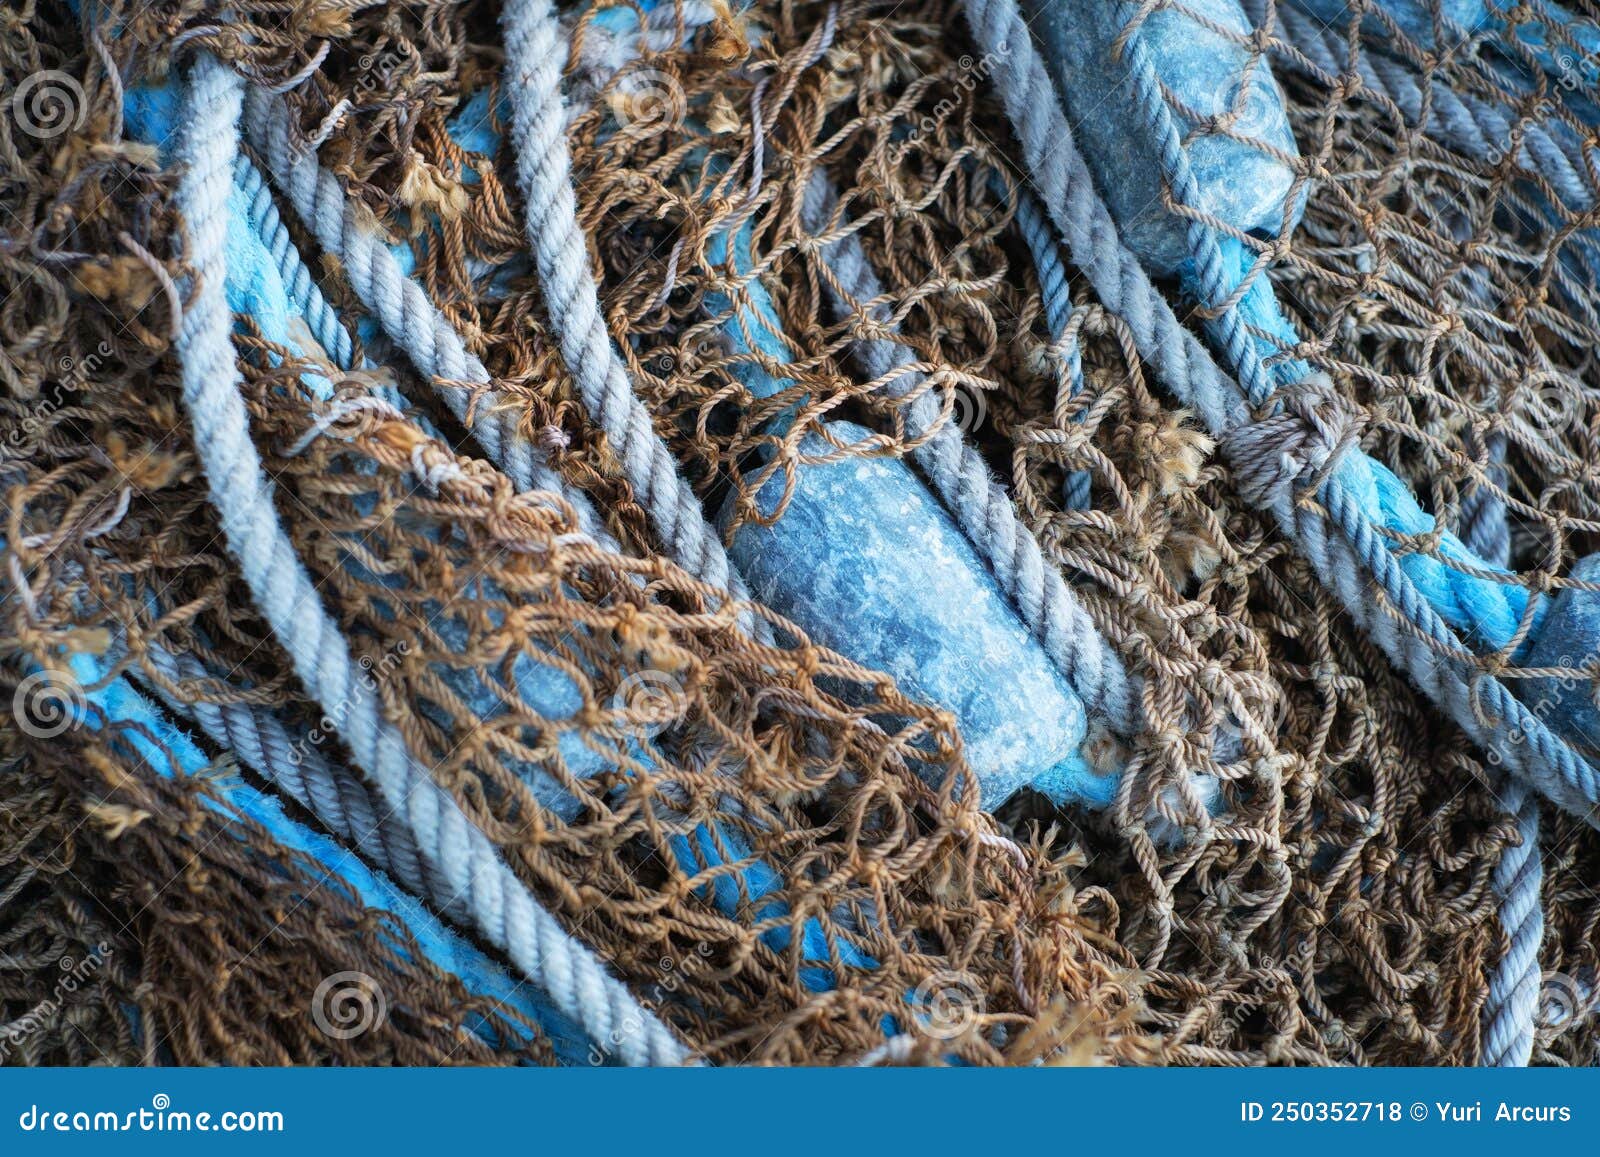 https://thumbs.dreamstime.com/z/buoys-net-tangible-together-as-fishing-gear-equipment-harbor-closeup-blue-sea-markers-mesh-piled-grouped-250352718.jpg